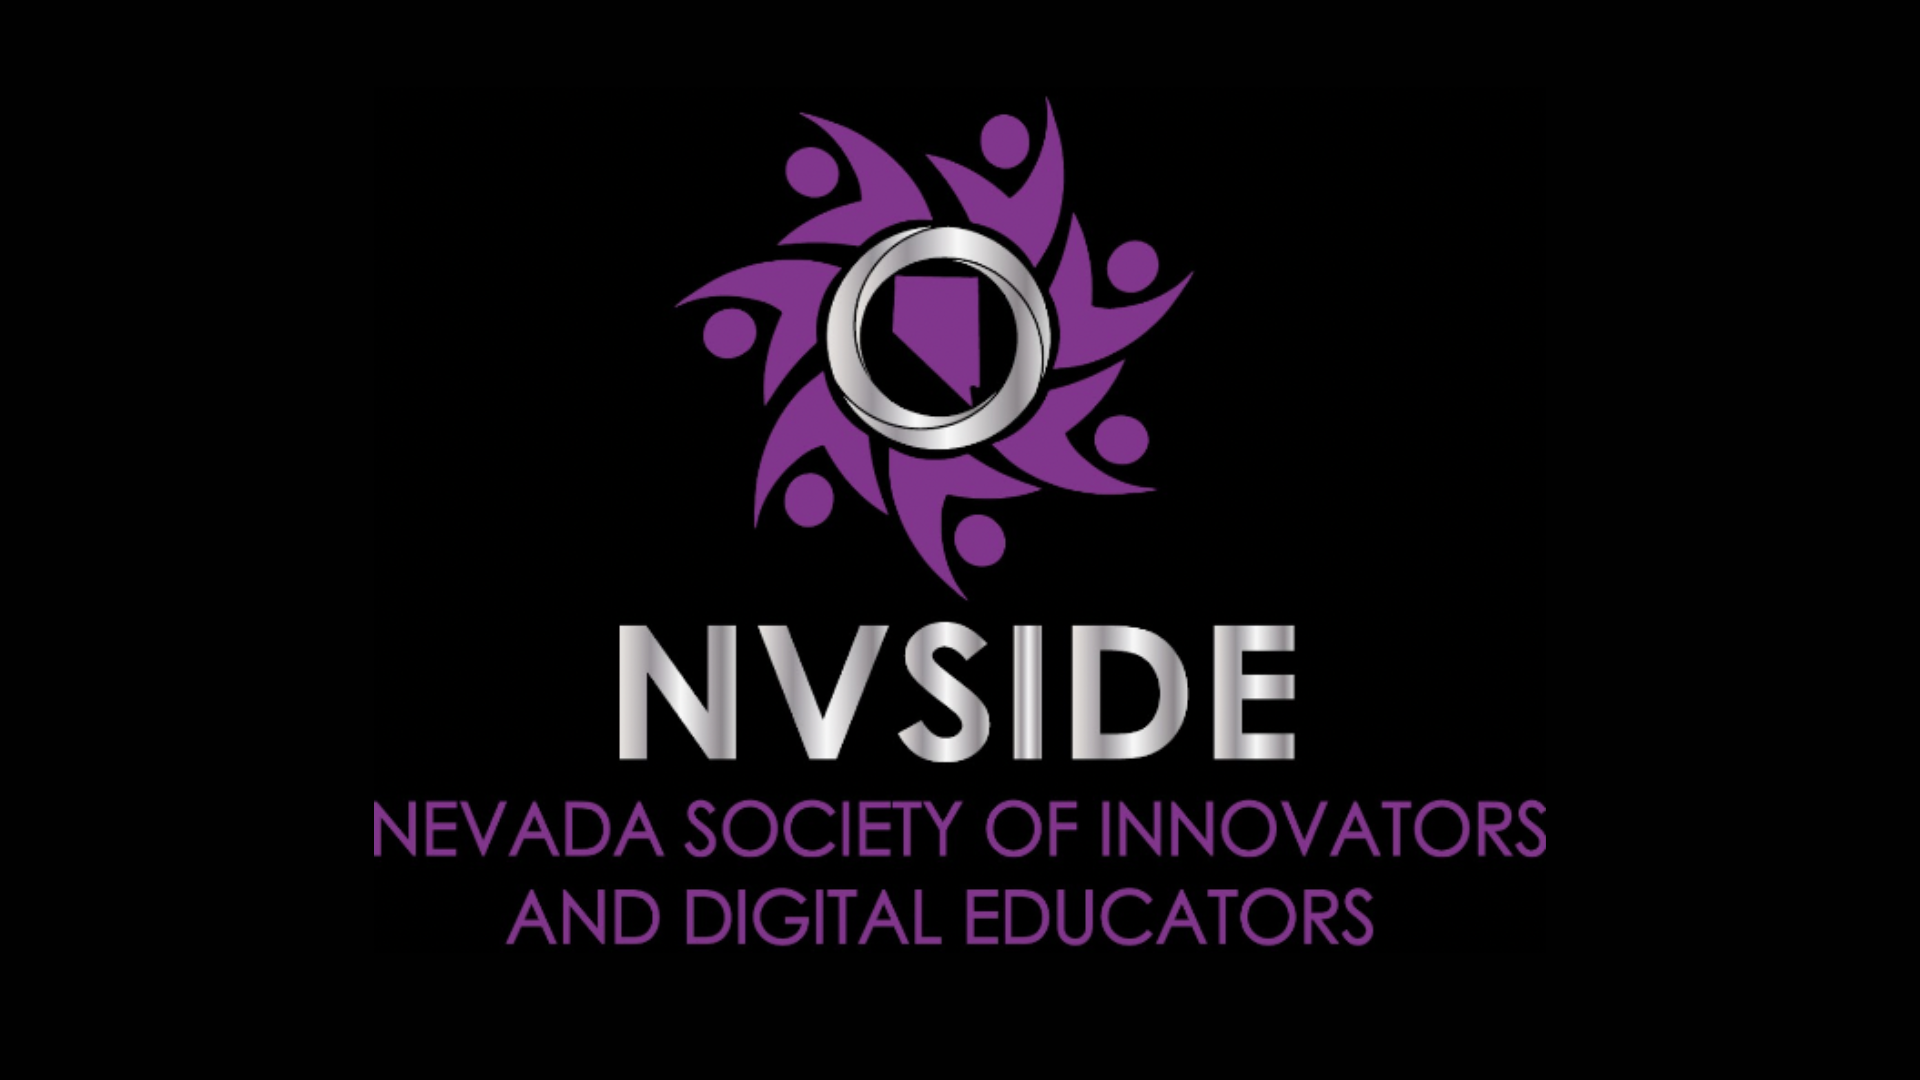 Exploring New Pathways at the NVSIDE Conference